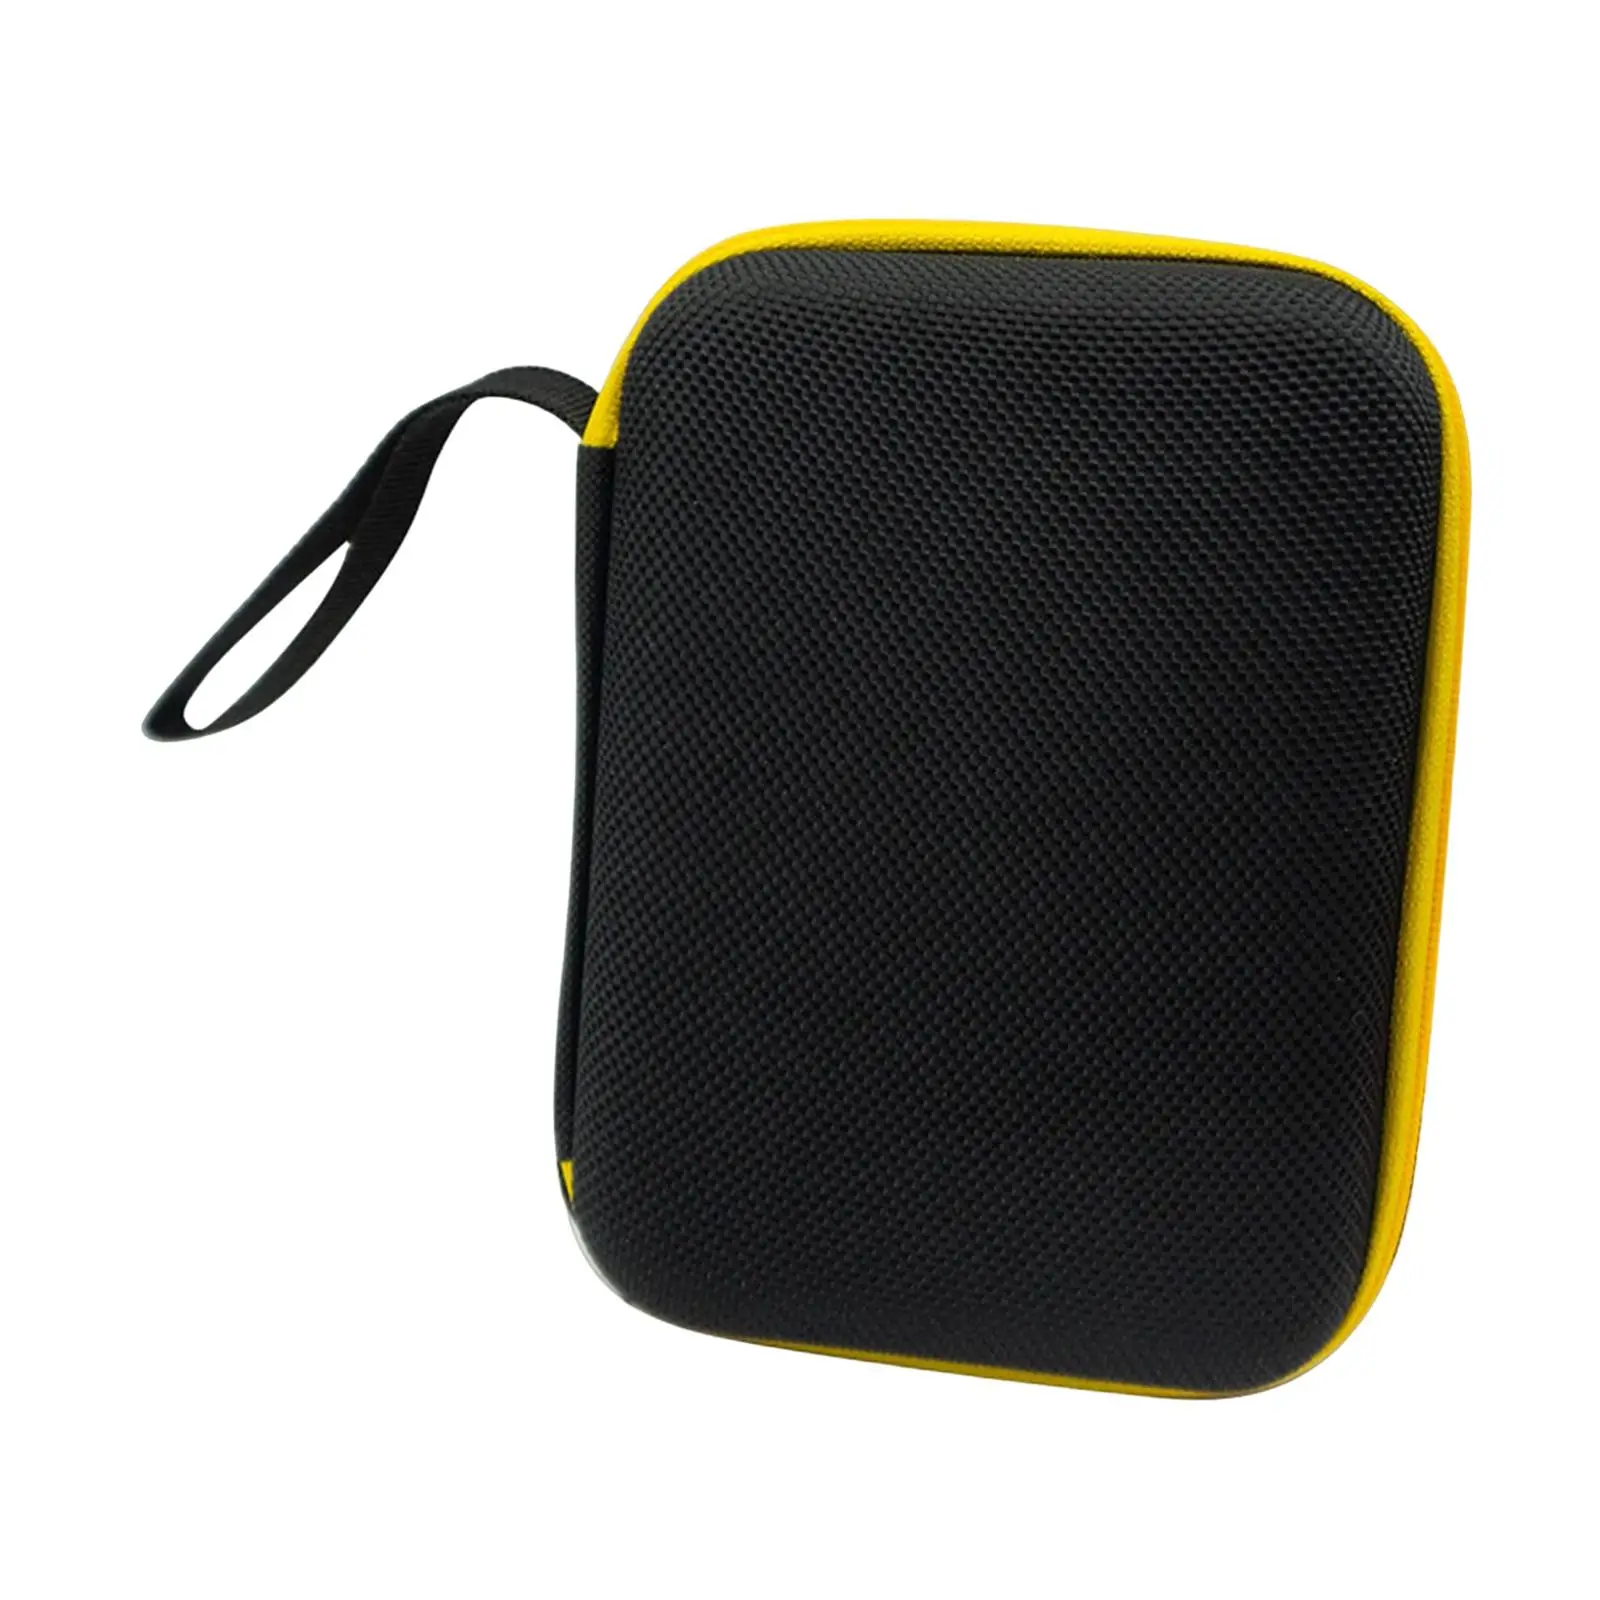 Handheld Game Console Case for Charging Cable Headphones Hard Travel Case Storage Bag Handheld Game Console Carrying Case